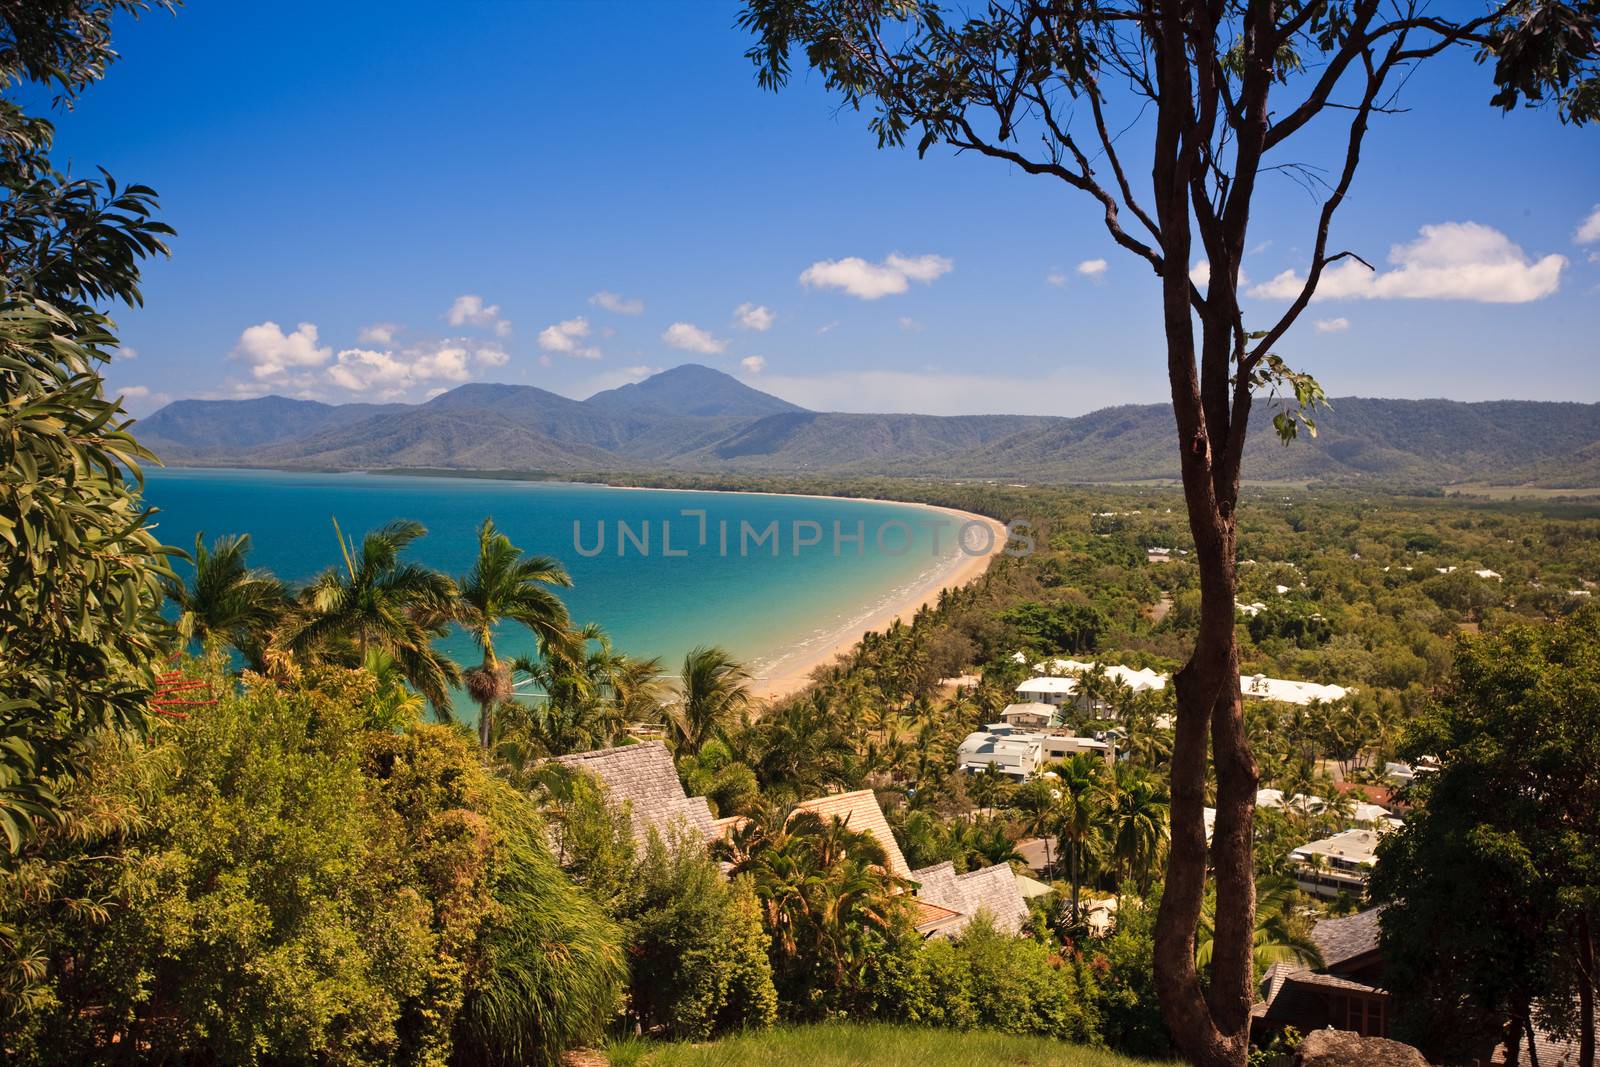 Australian coastline with golden beaches and a small settlement nestling amongst the tropical vegetation and palm trees